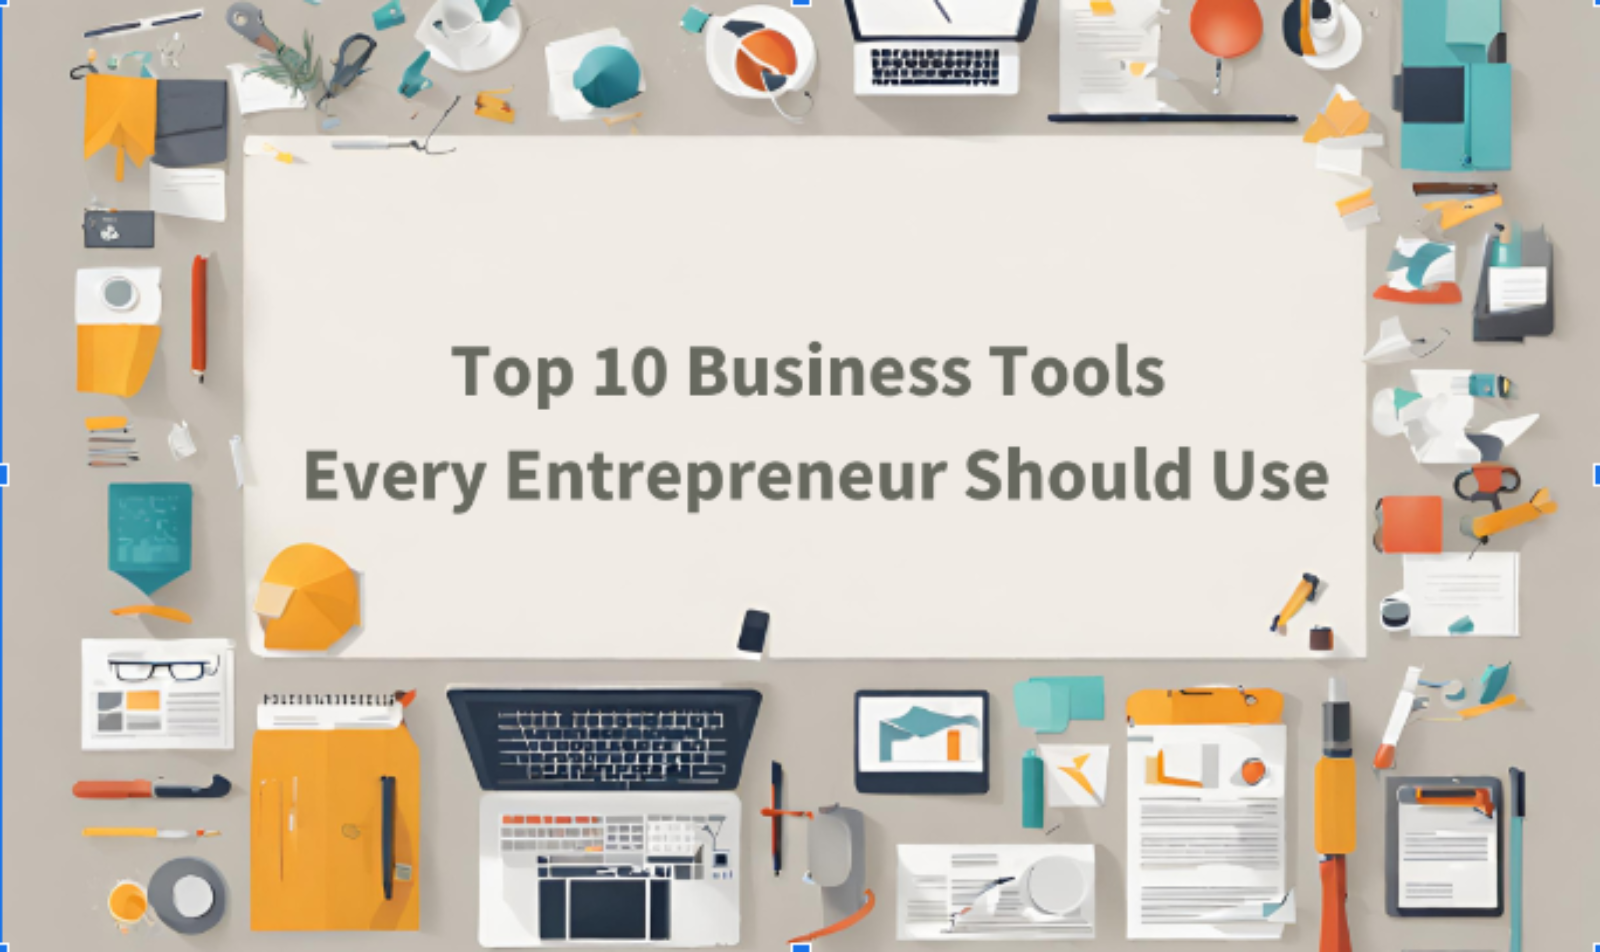 Top 10 Business Tools Every Entrepreneur Should Use